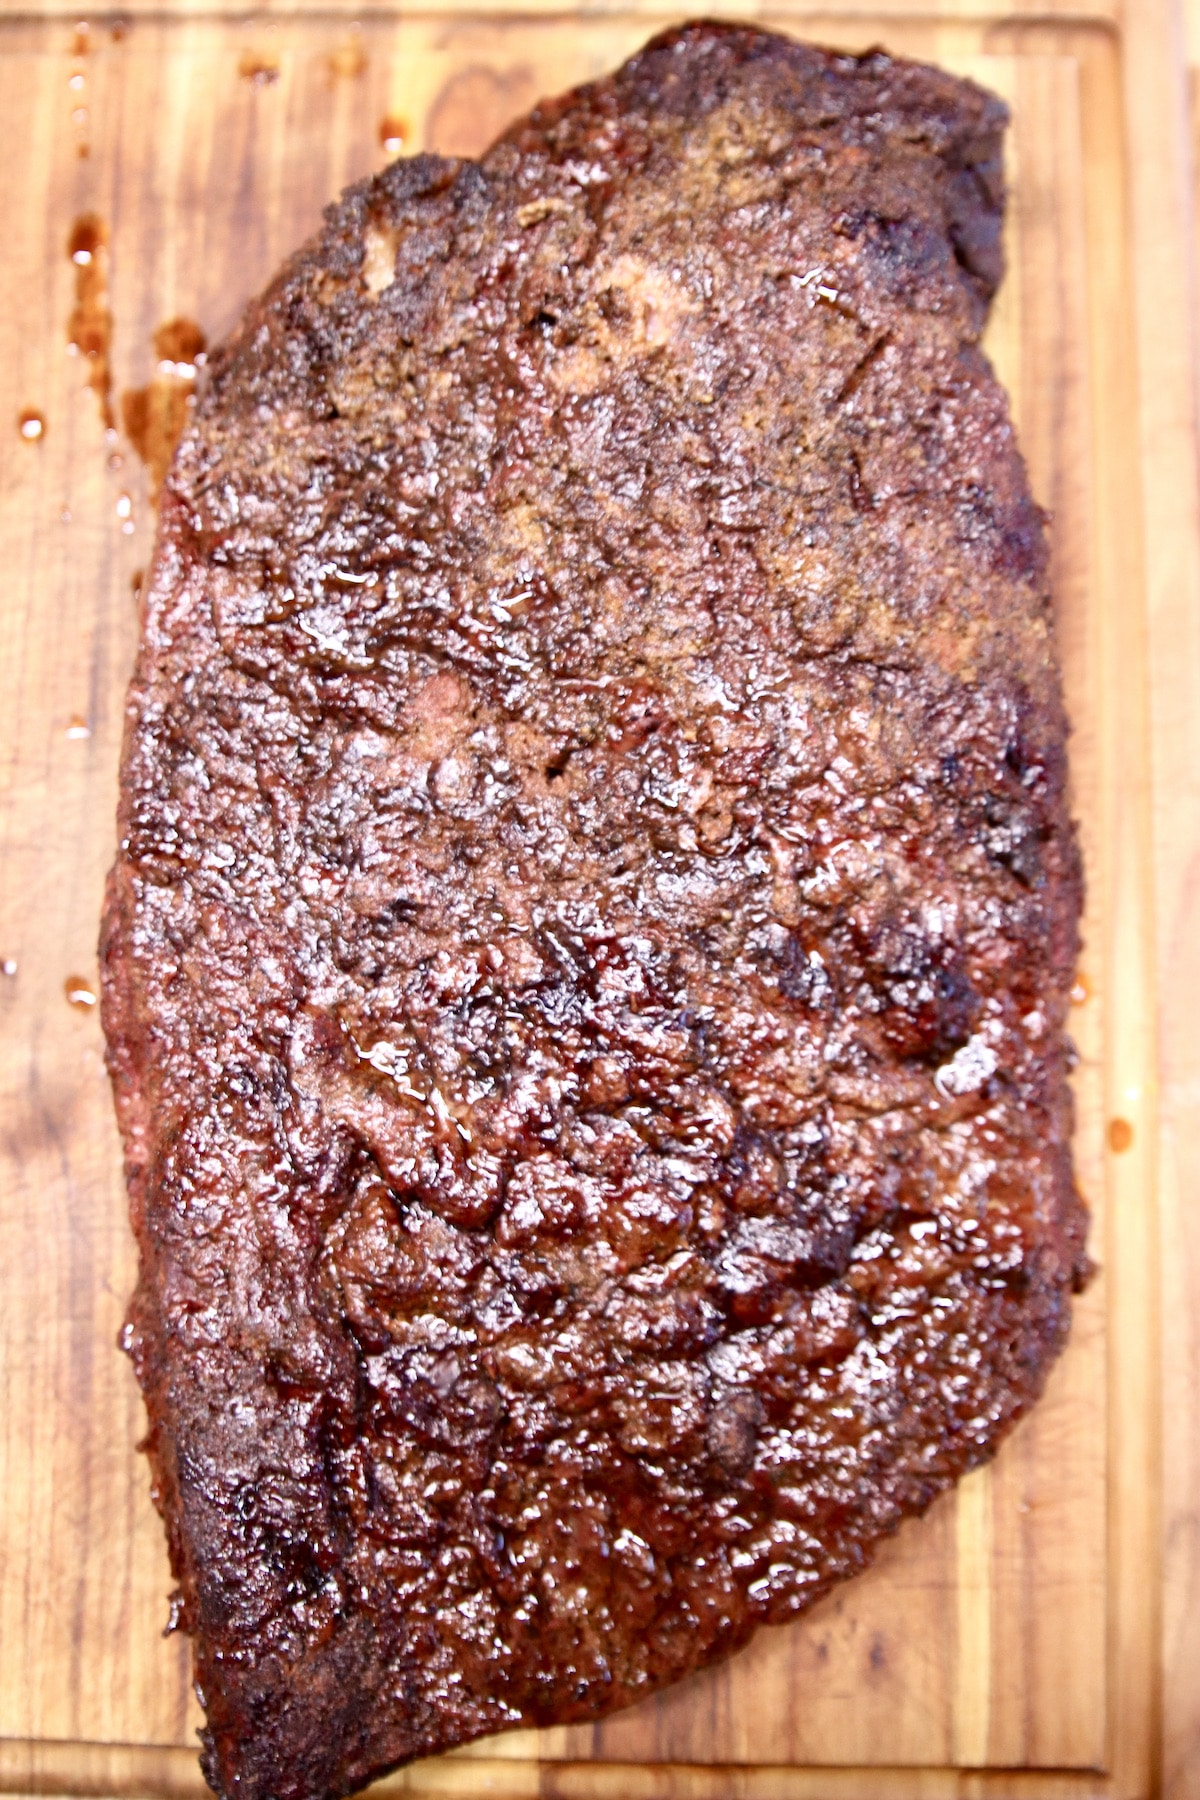 Smoked whole beef brisket on a cutting board.